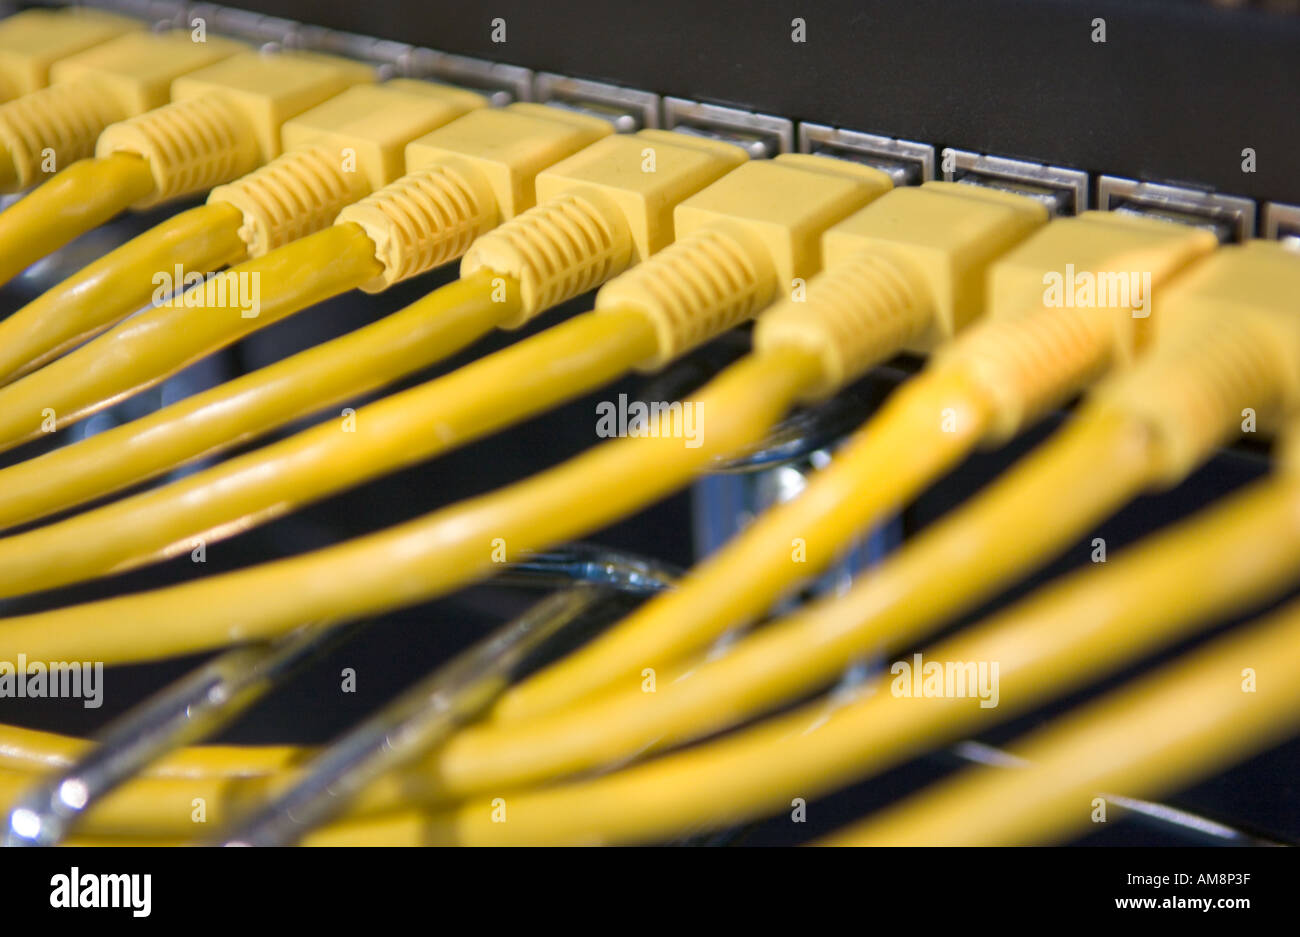 yellow ethernet cables connect black ethernet hubs Stock Photo